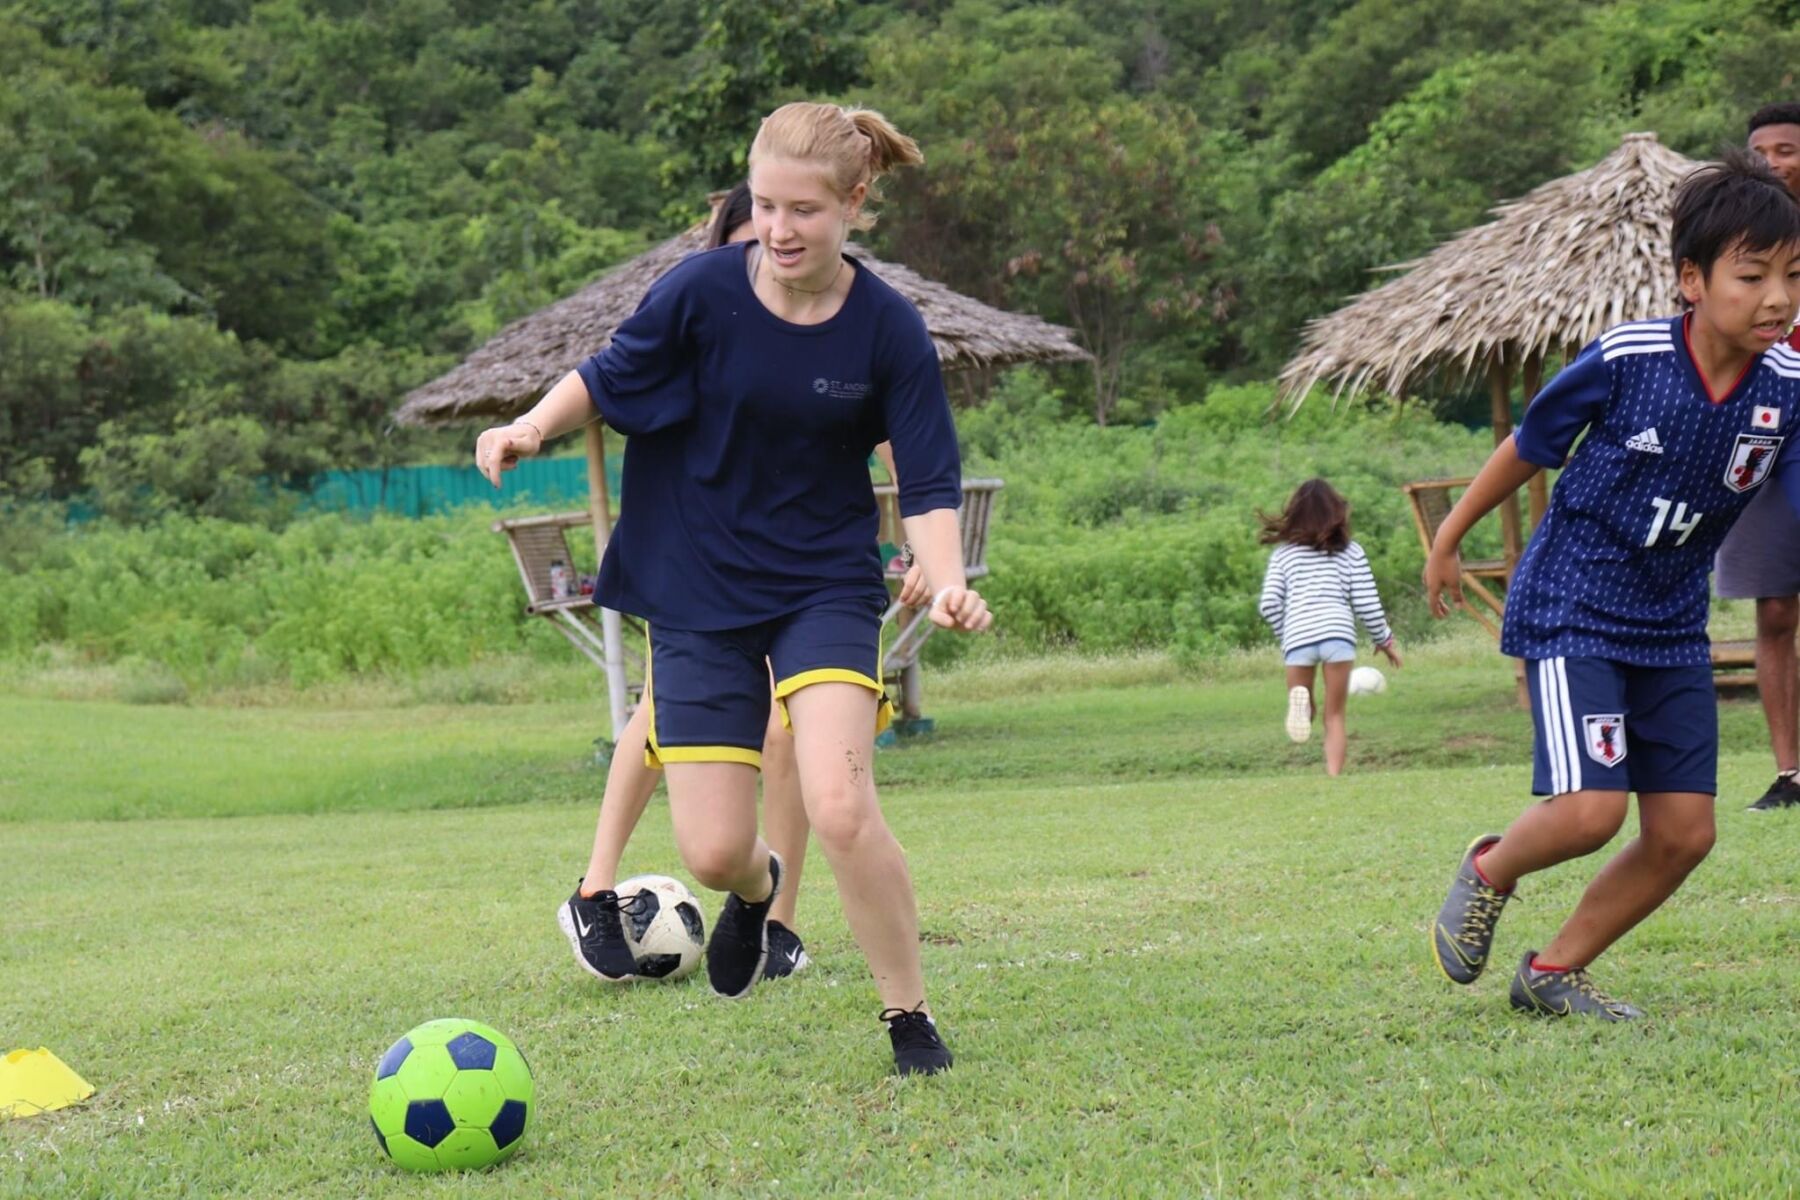 A girl playing soccer during a summer camp, iCamp Thailand.